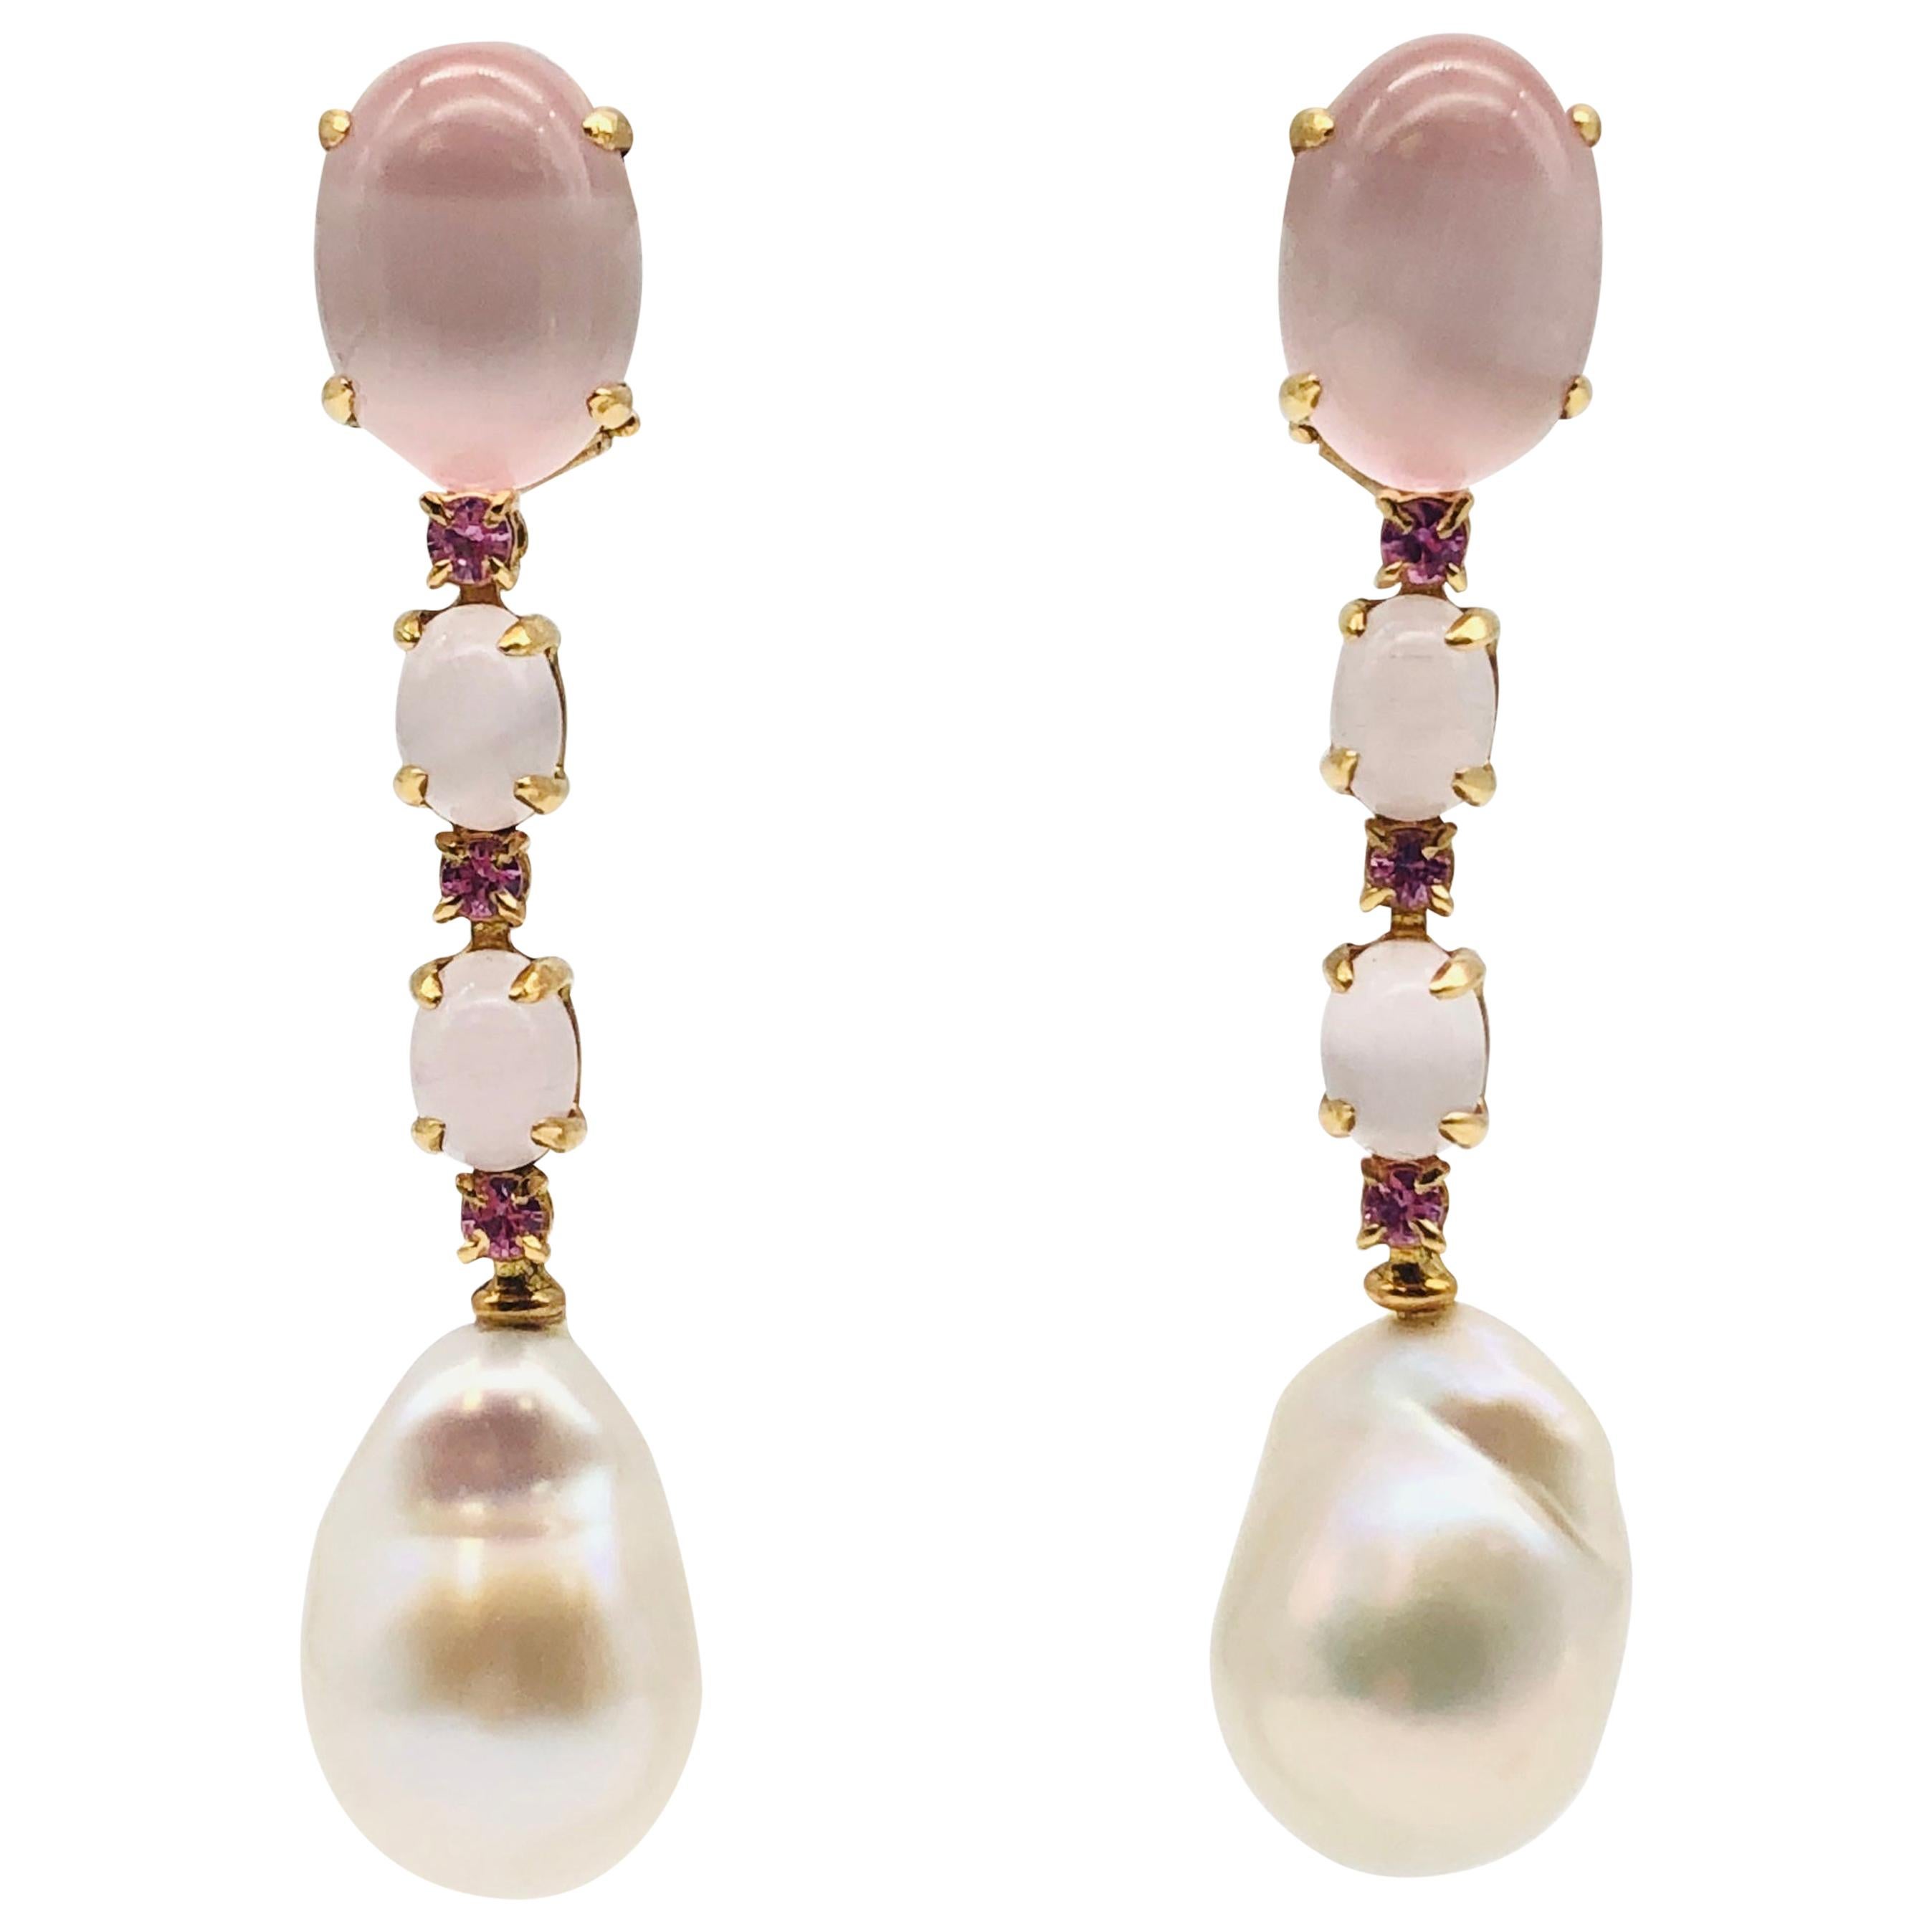 Quartz, Tourmalines and Baroque Pearls on Yellow Gold Earrings